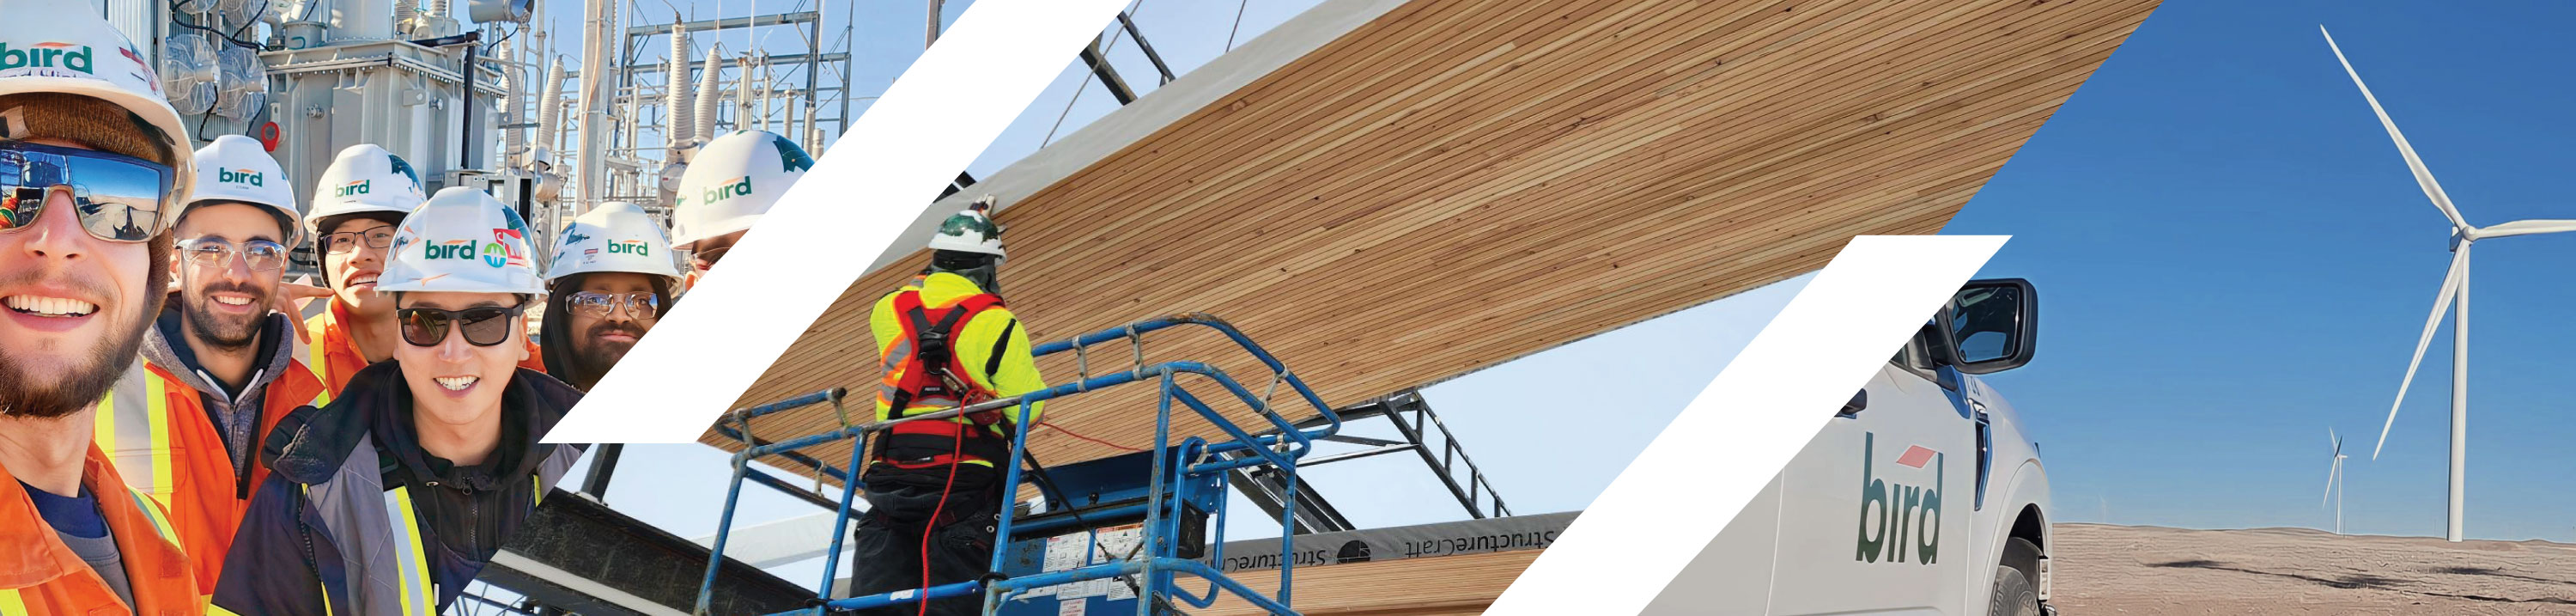 3 sustainability header images with dividers. Onsite smiling workers, mass timber install, and wind turbine.